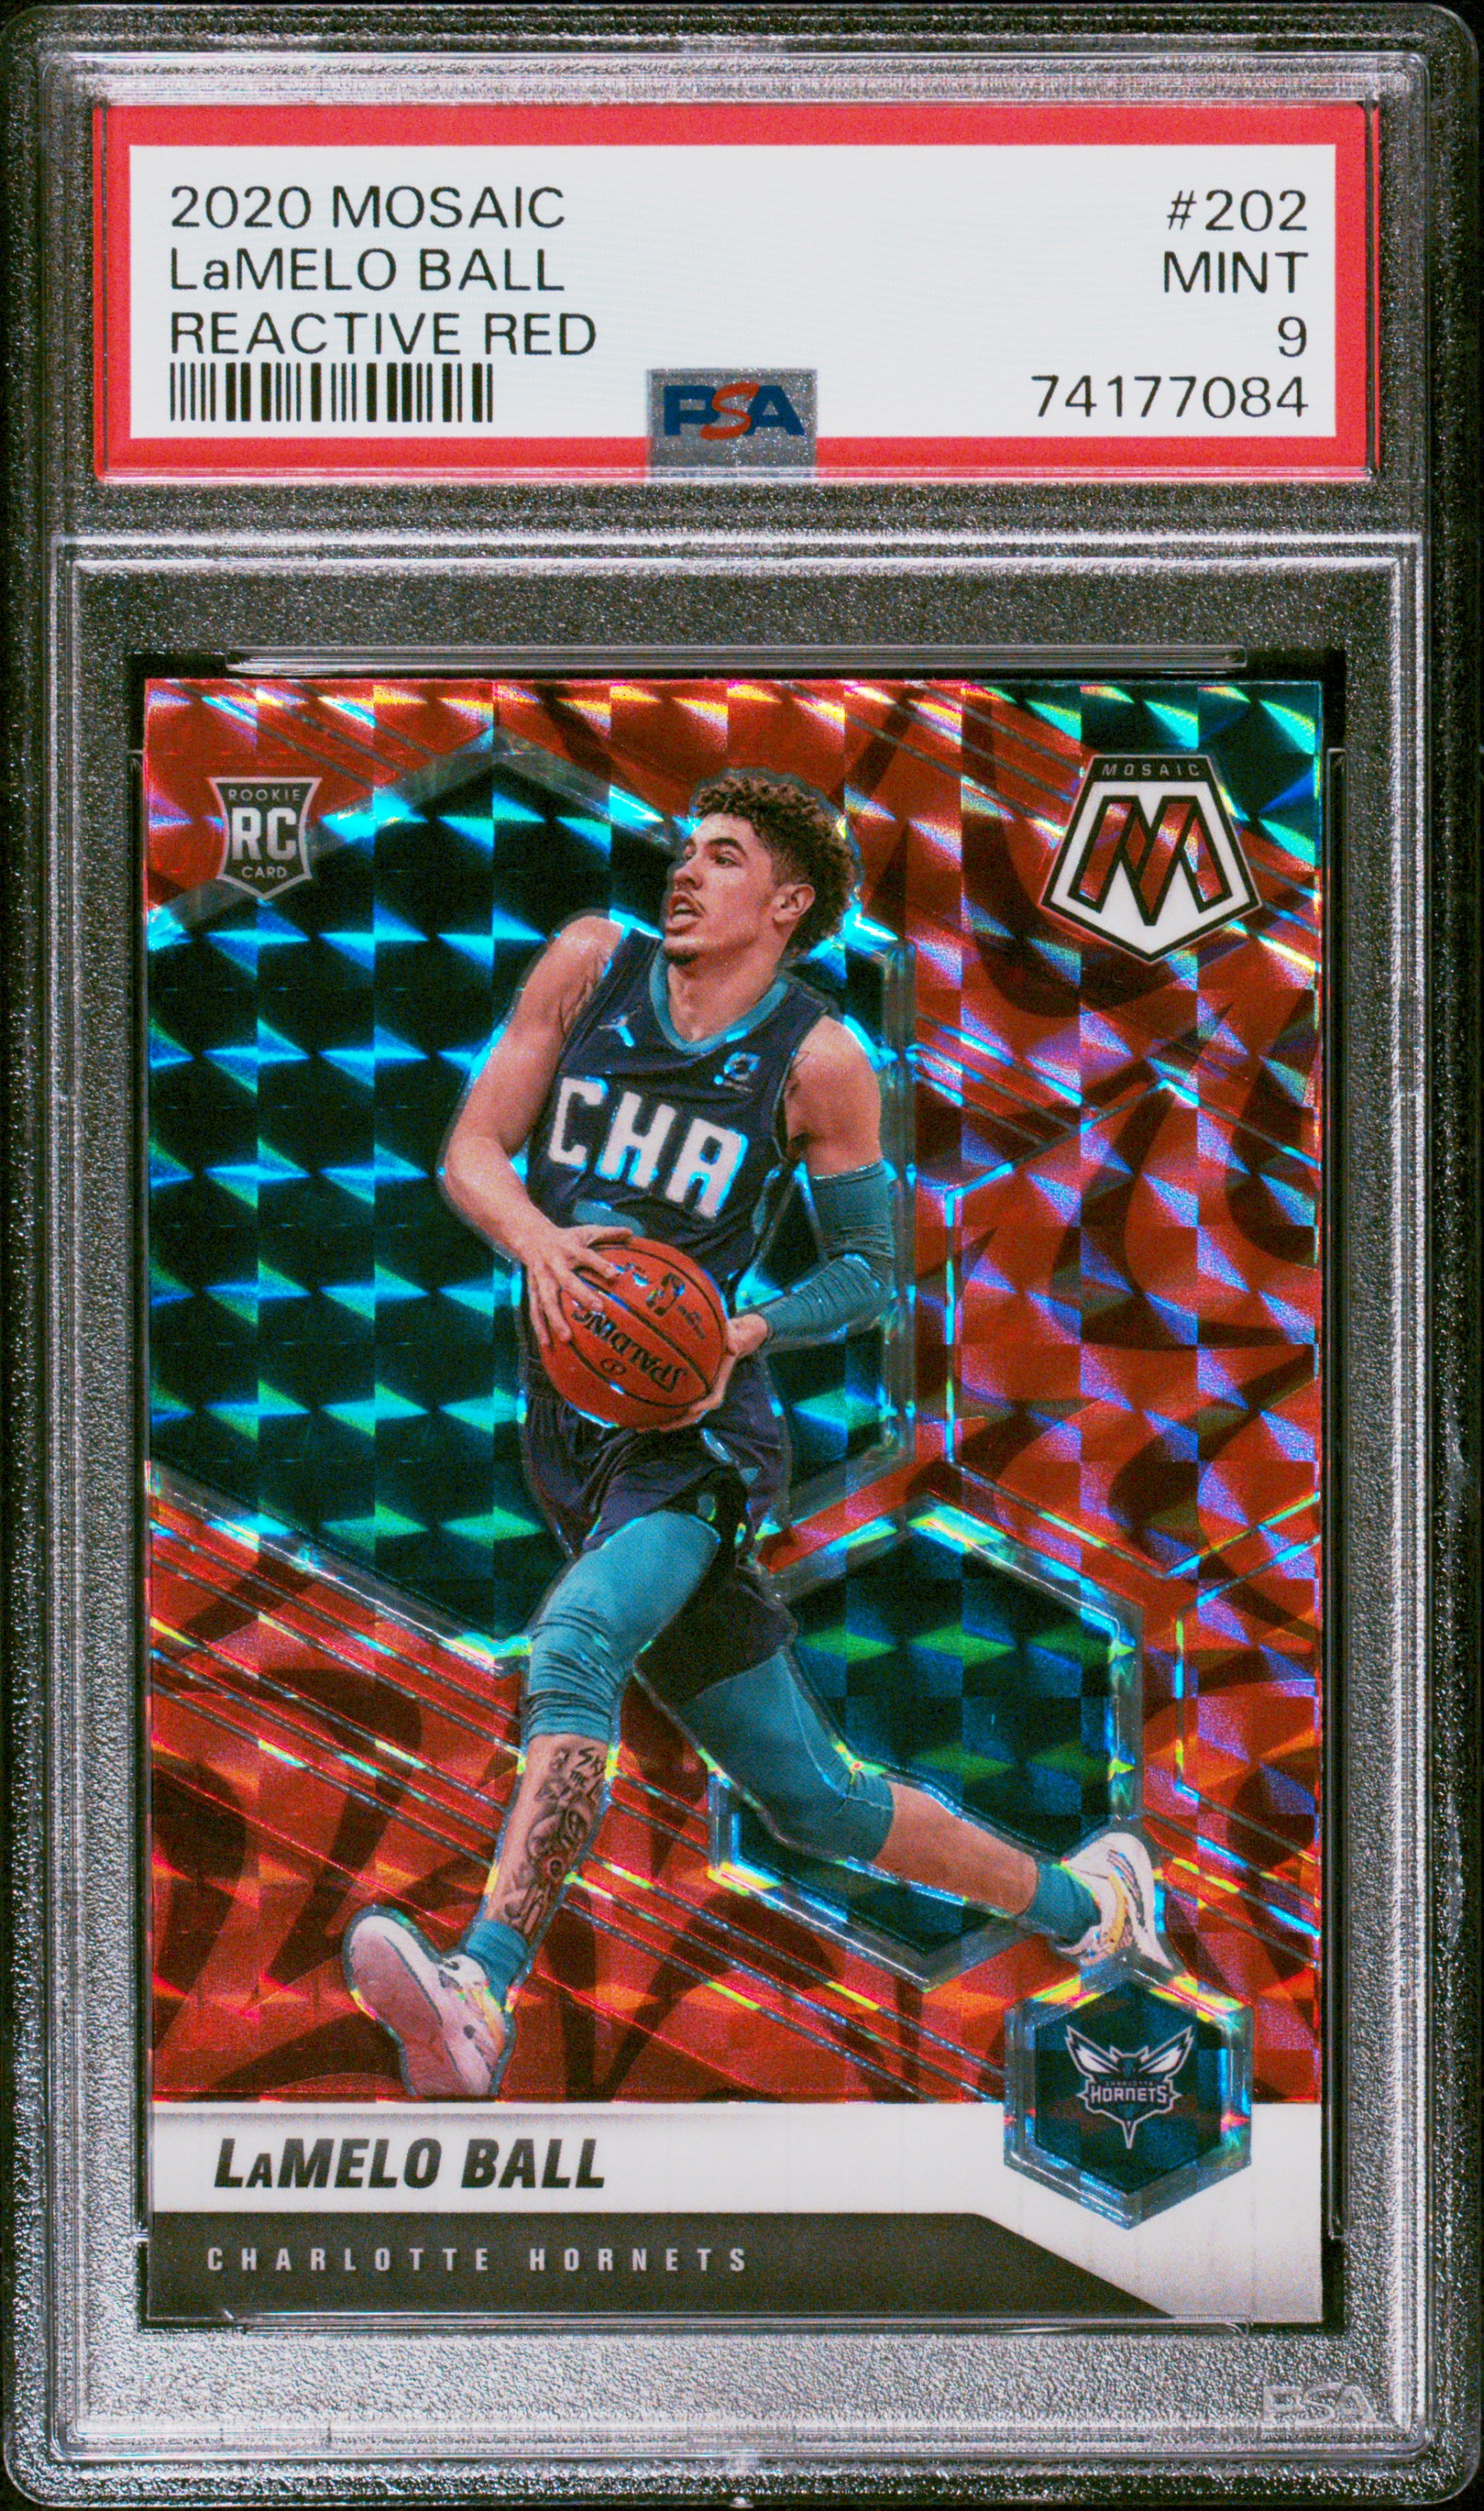 2020-21 Panini Mosaic Reactive Red Prizm #202 Lamelo Ball Rookie Card – PSA MINT 9